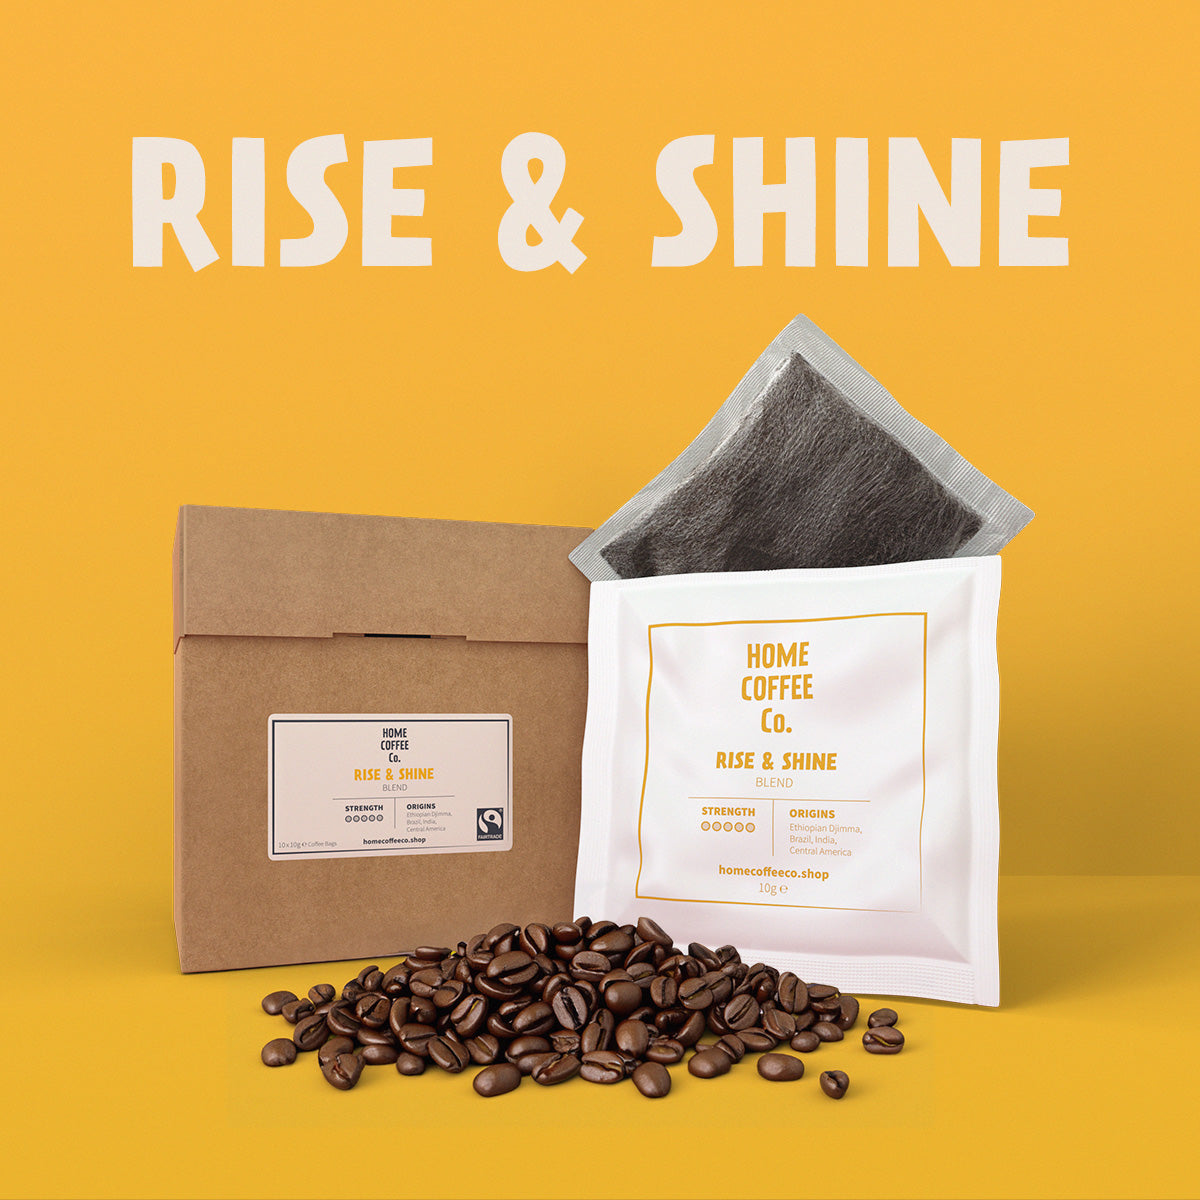 Coffee brew bags – what are they?